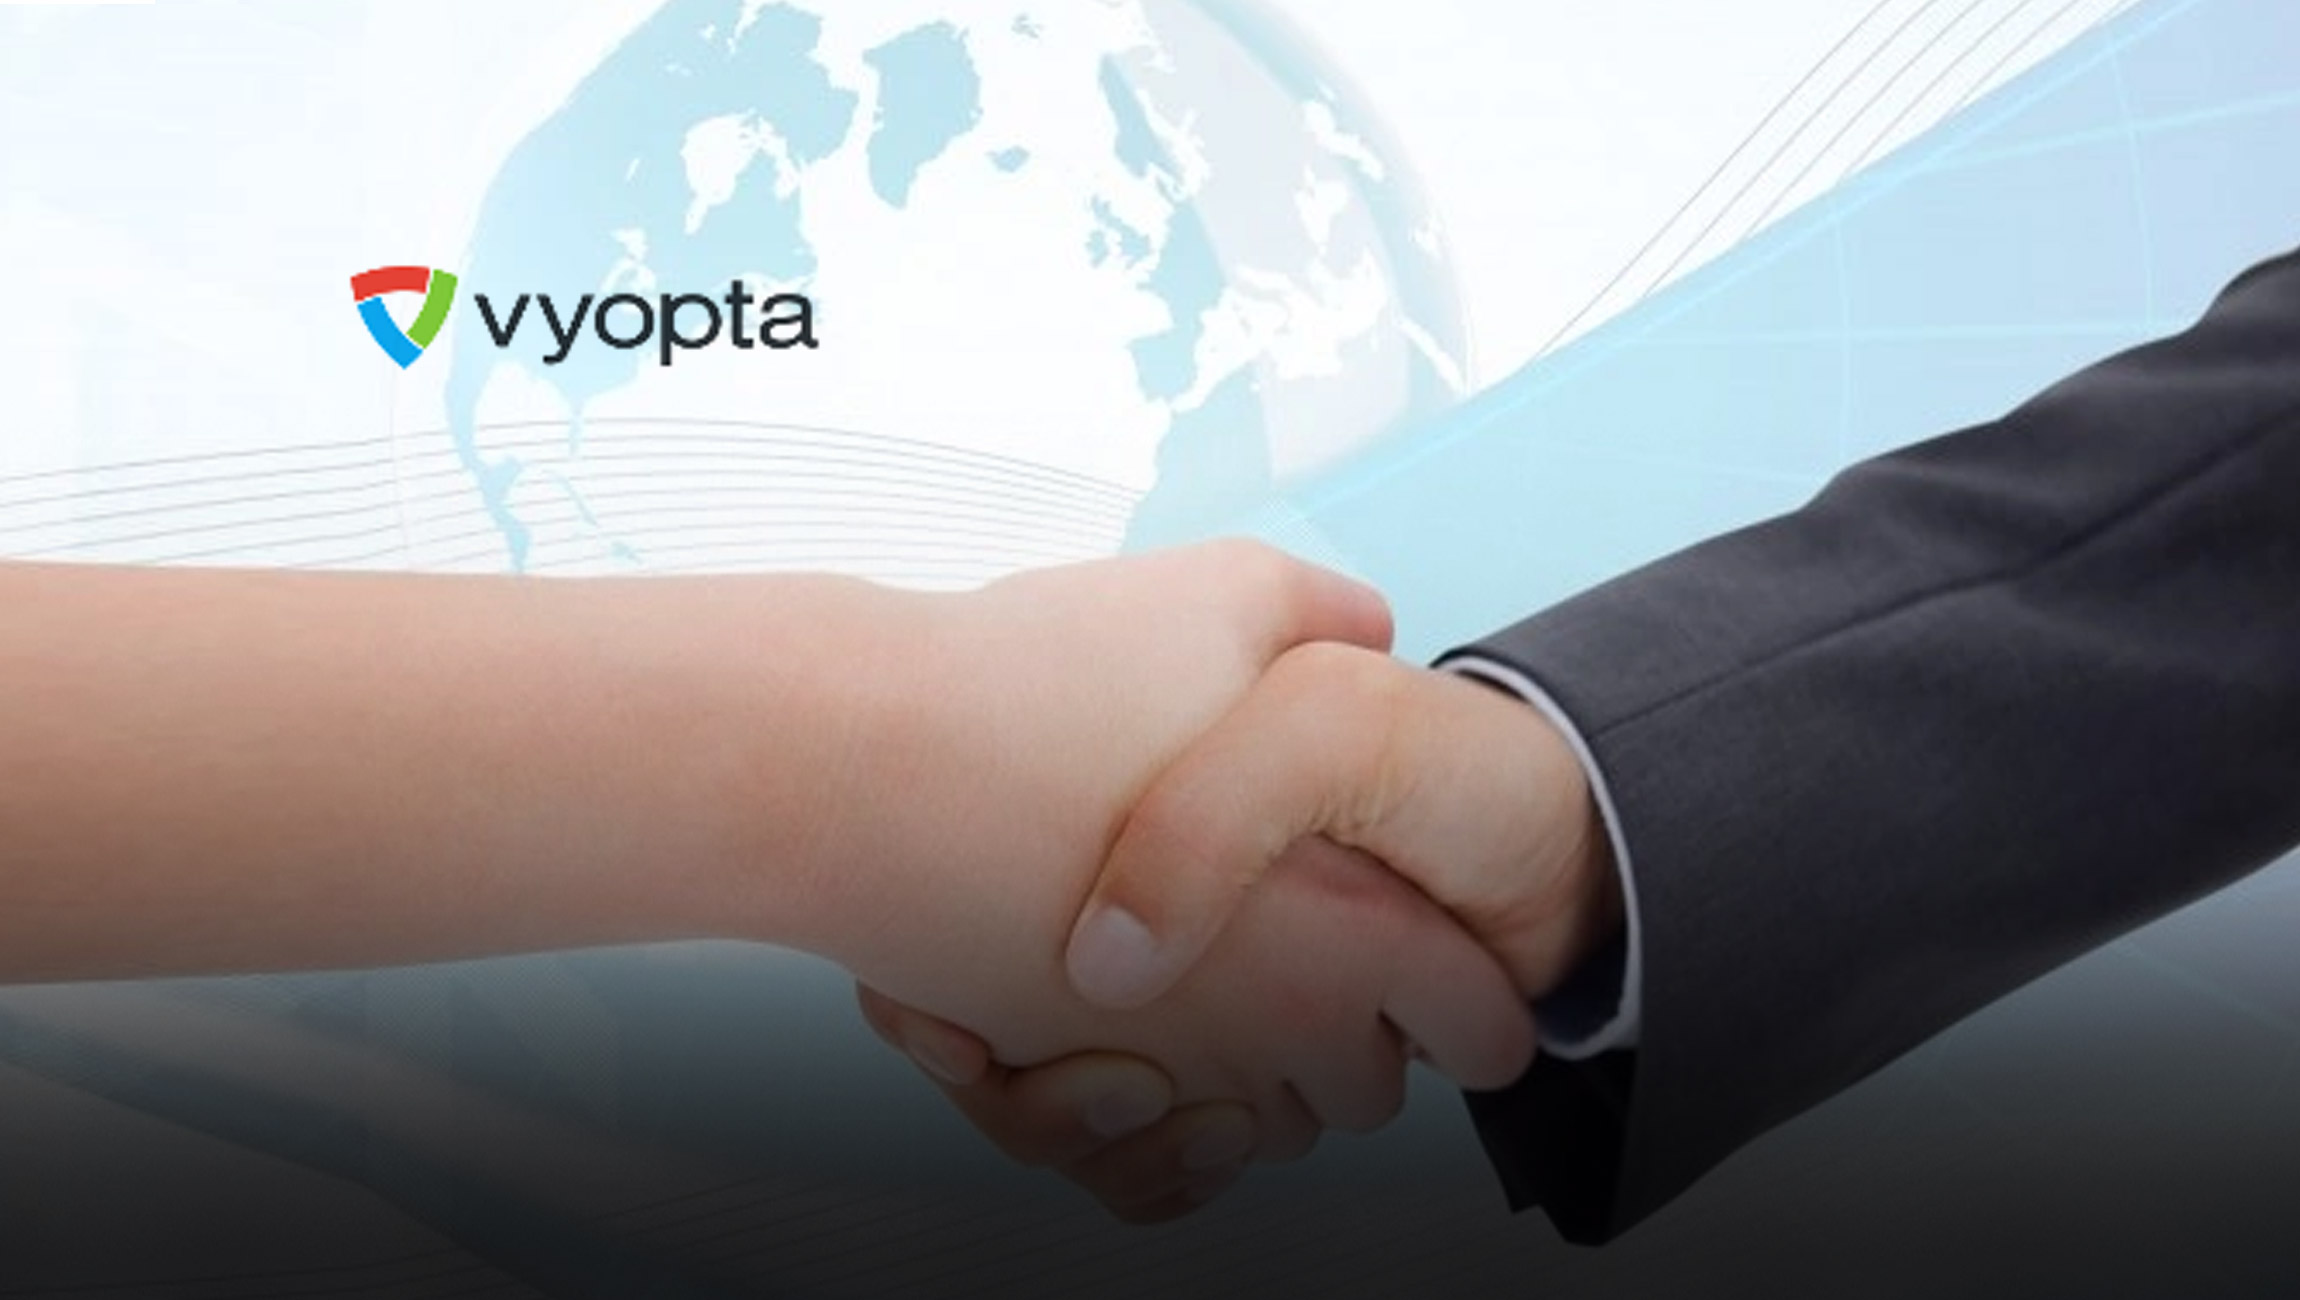 Vyopta is a Finalist for Best UC Vendor by UC Today's UC Partner Awards